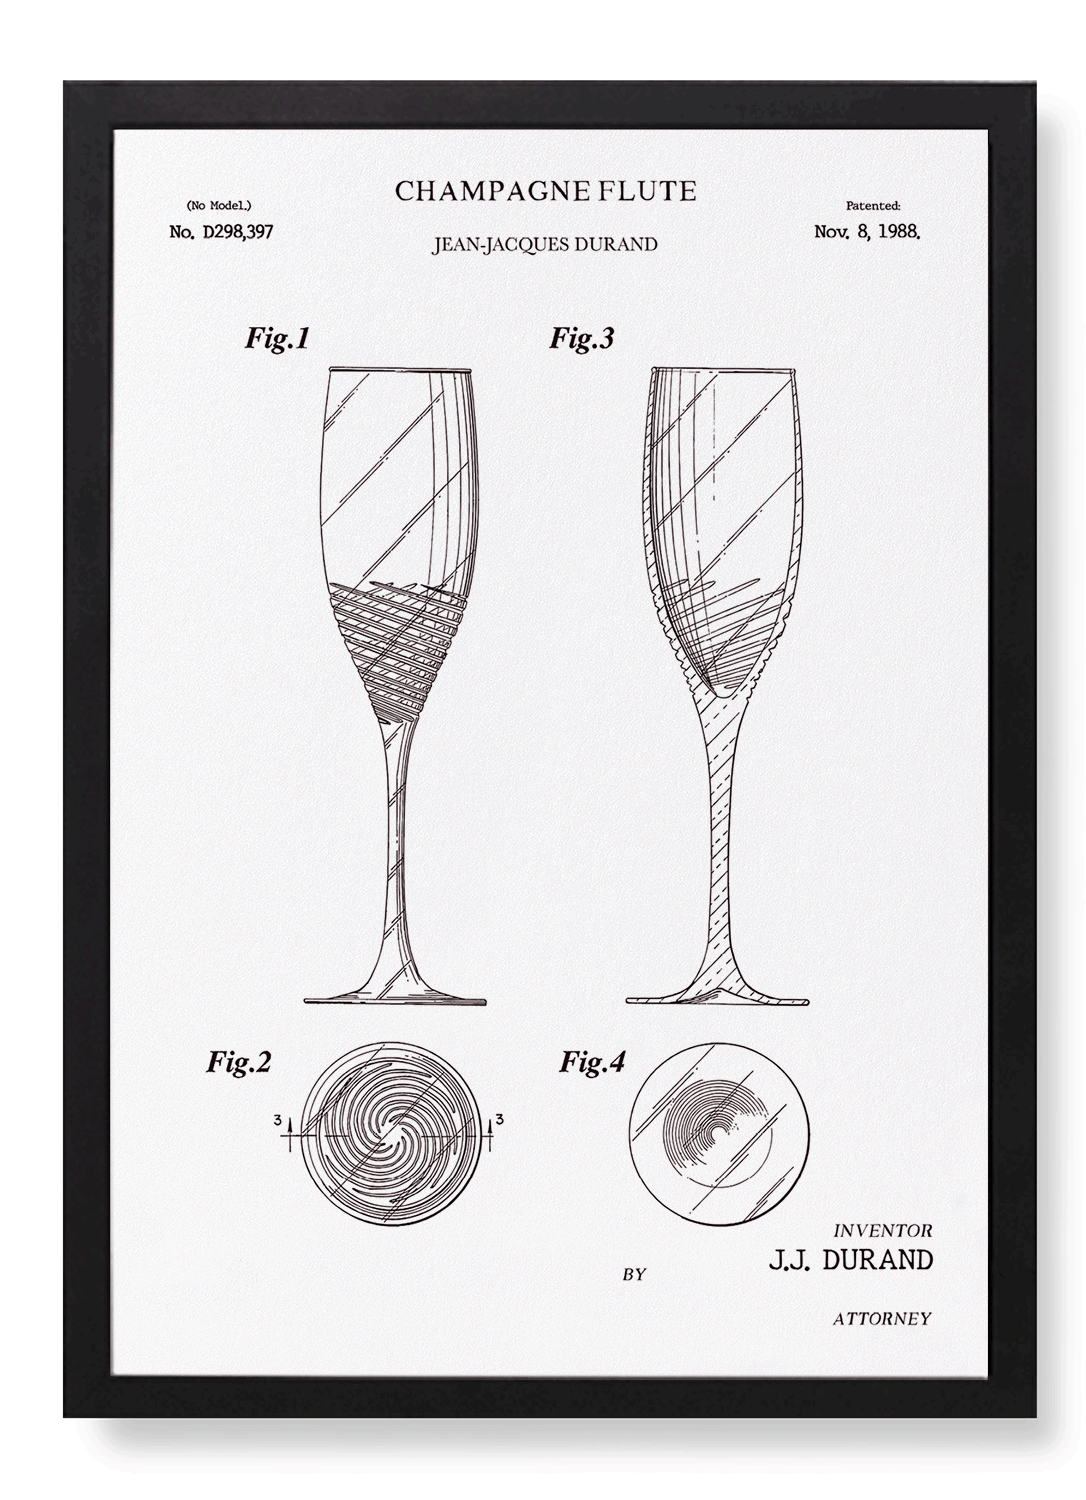 PATENT OF CHAMPAGNE FLUTE (1988)